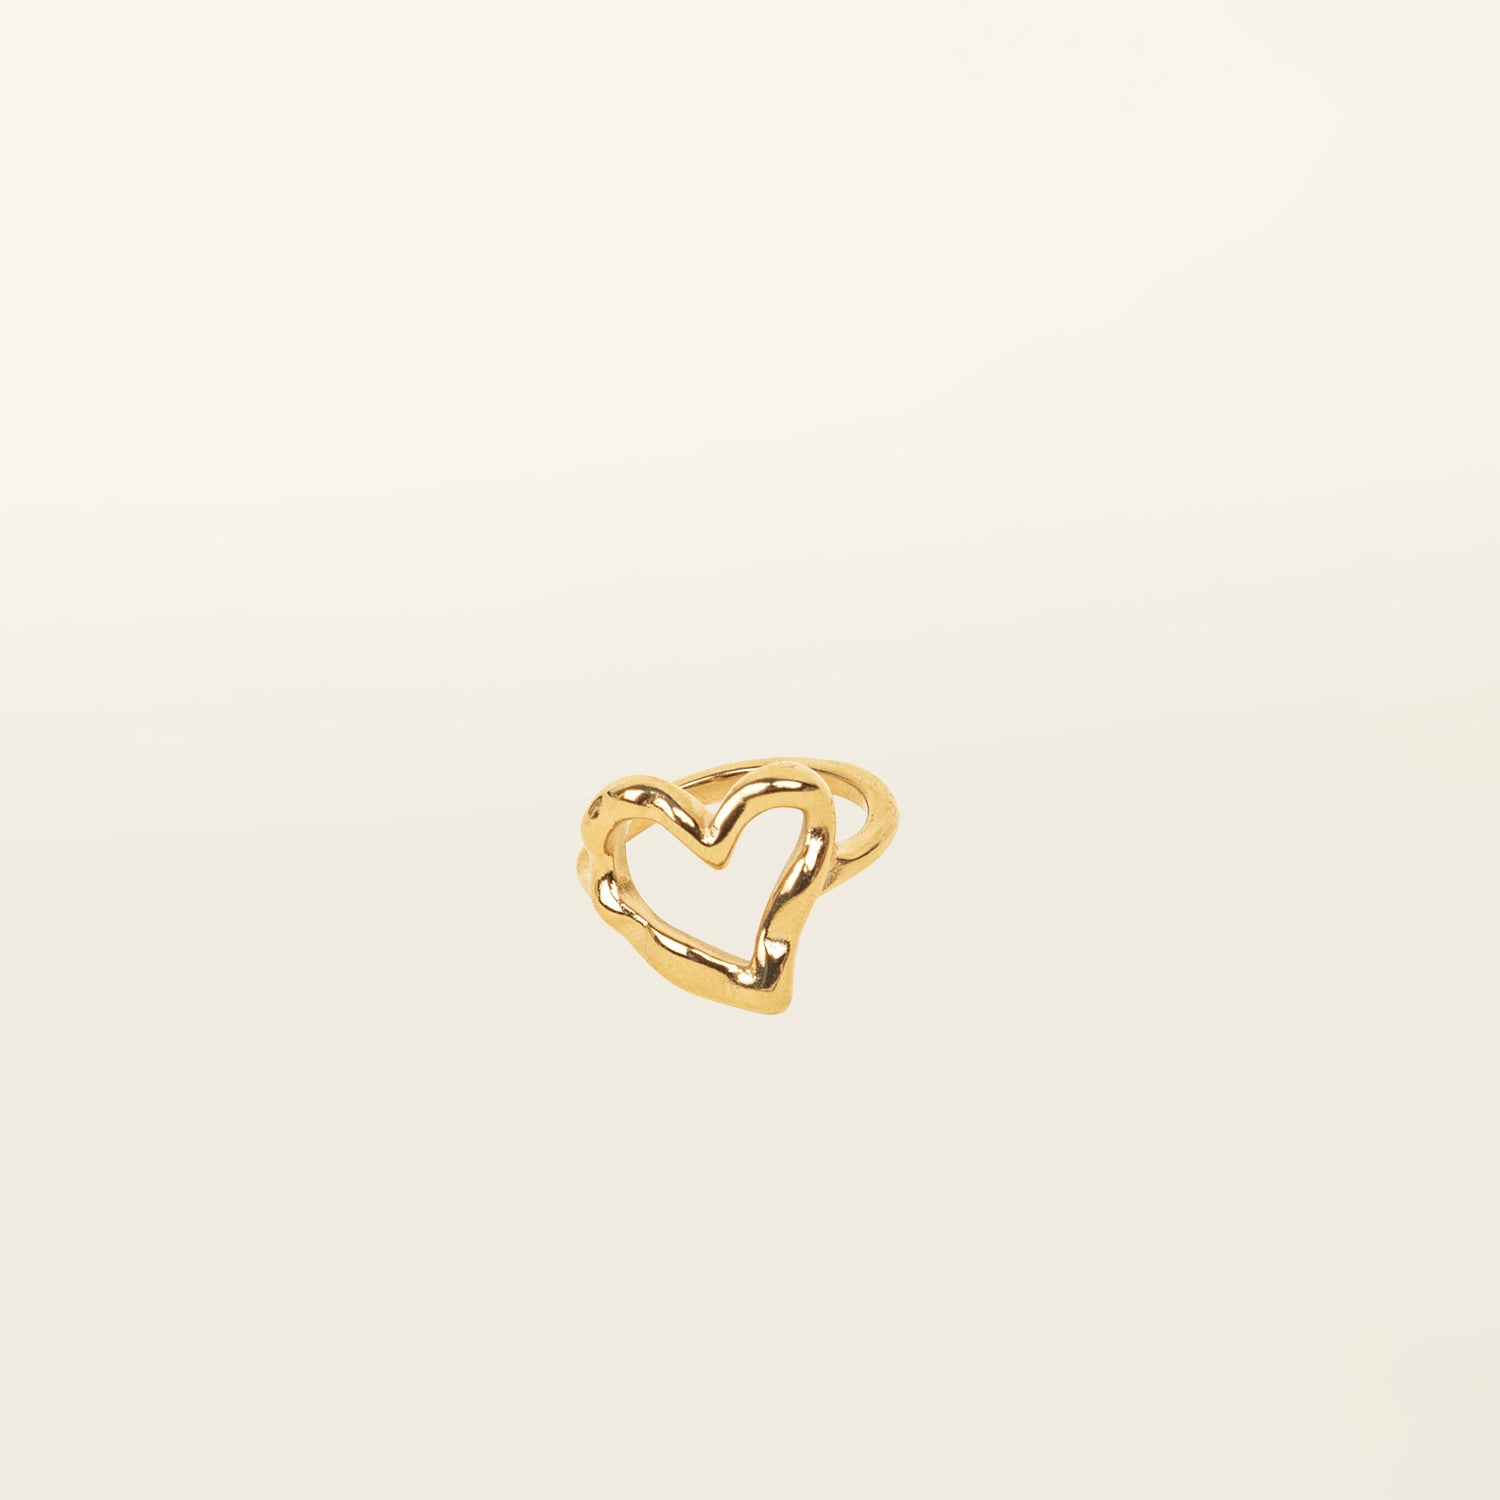 Image of the Ai Heart Ring in Gold is crafted with of 14K Gold Plated Stainless Steel, ensuring a durable and non-tarnishing construction. This piece is also water resistant and made without Lead, Nickel, or Cadmium for added safety. This is a single ring, with no ability to adjust.